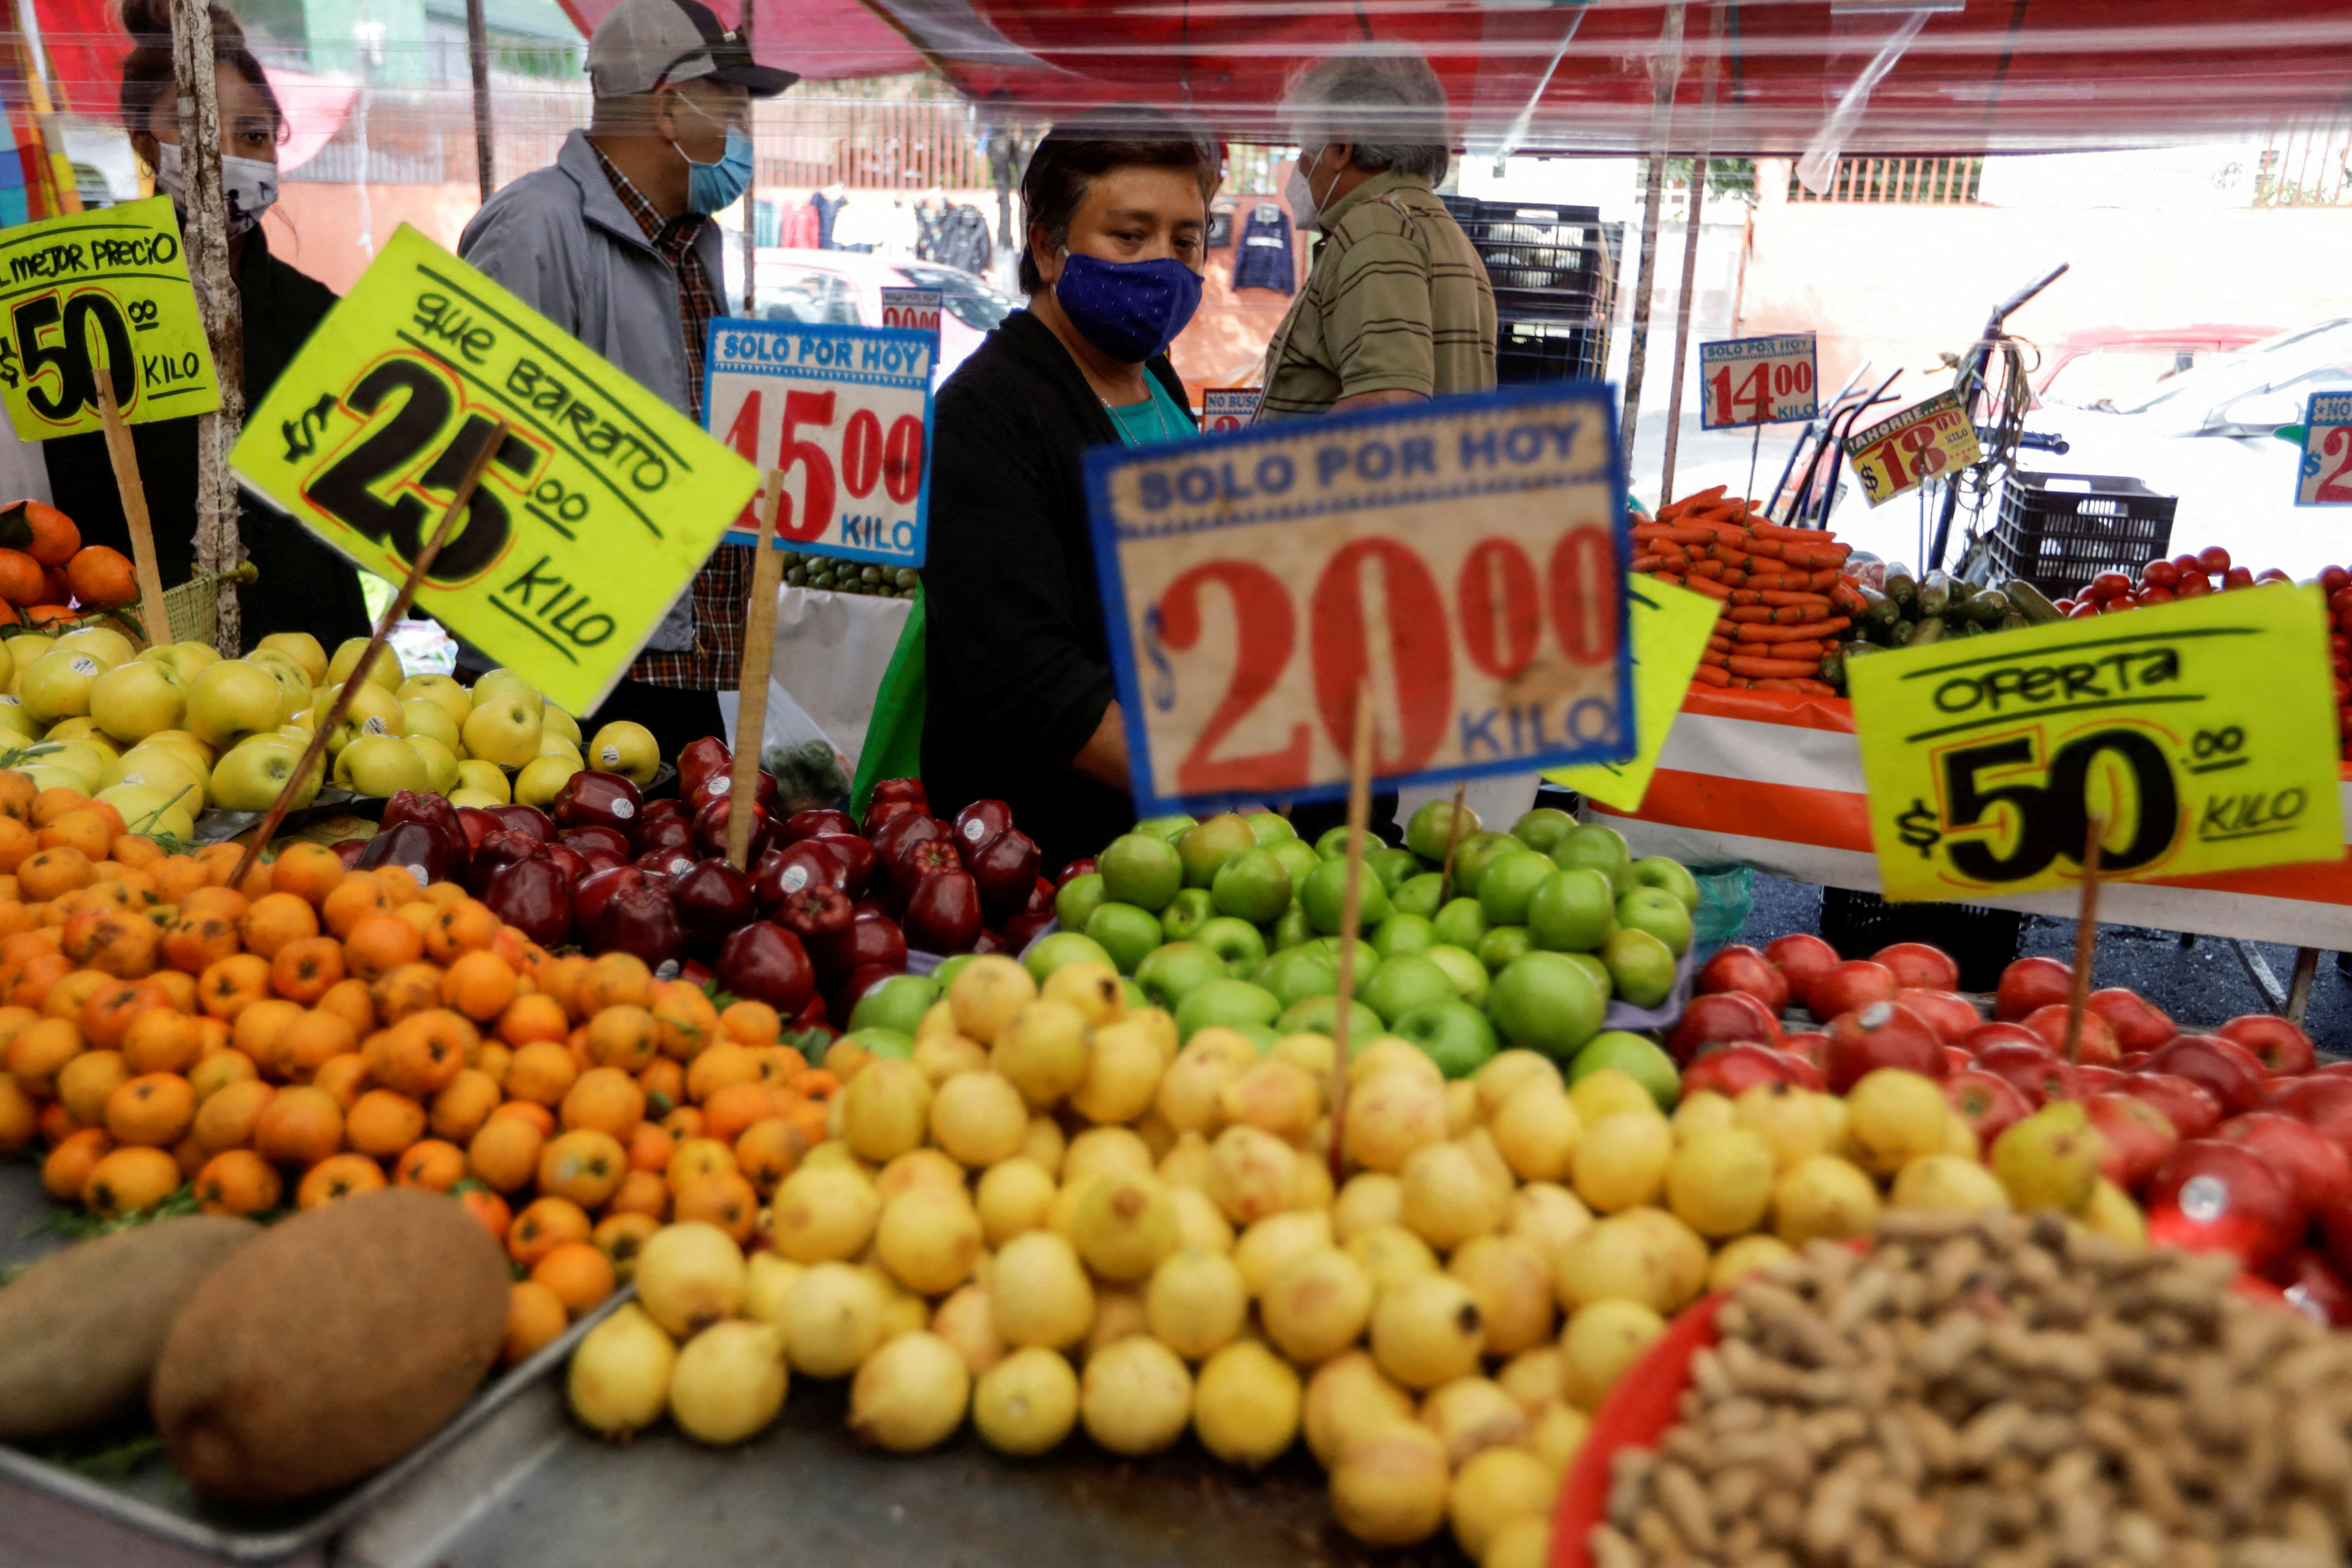 Customers walk past a fruit stall at a street market, in Mexico City, Mexico December 17, 2021. REUTERS/Luis Cortes/File Photo